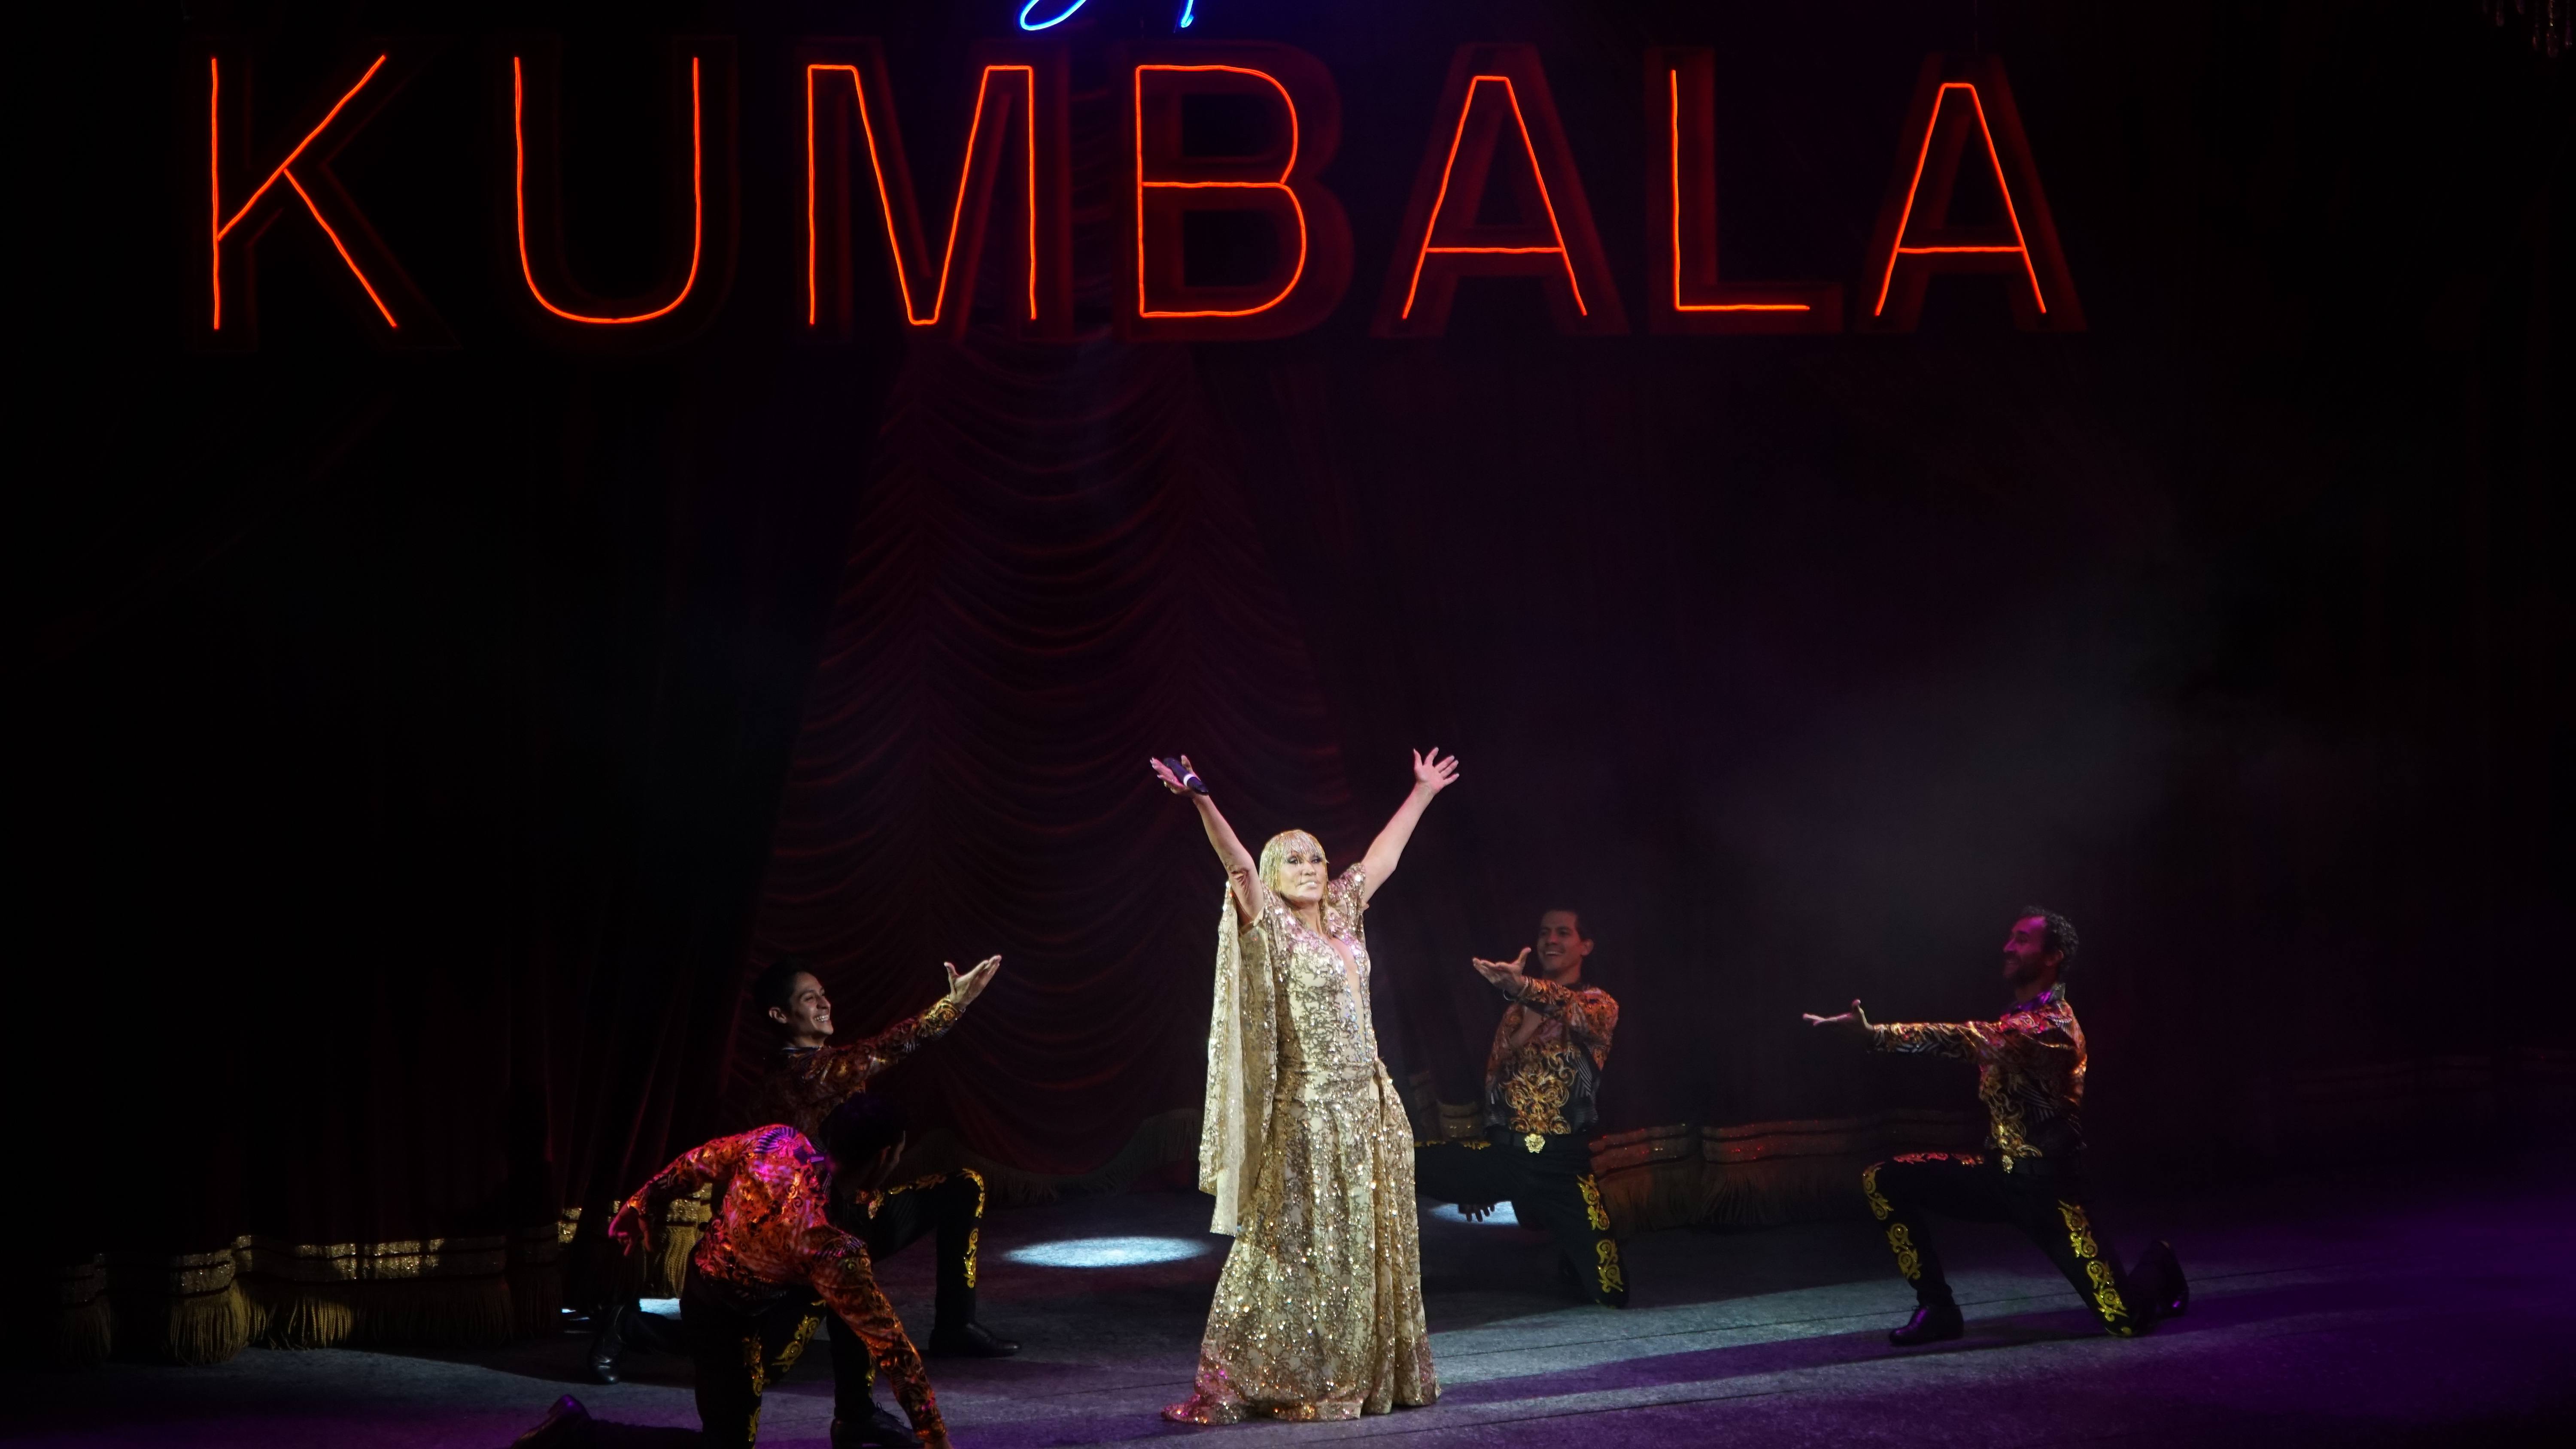 Laura León will make her theater debut with a special participation;  she will be the singer "Kumbala Hall" (Photo: Oliver Campa/Infobae)